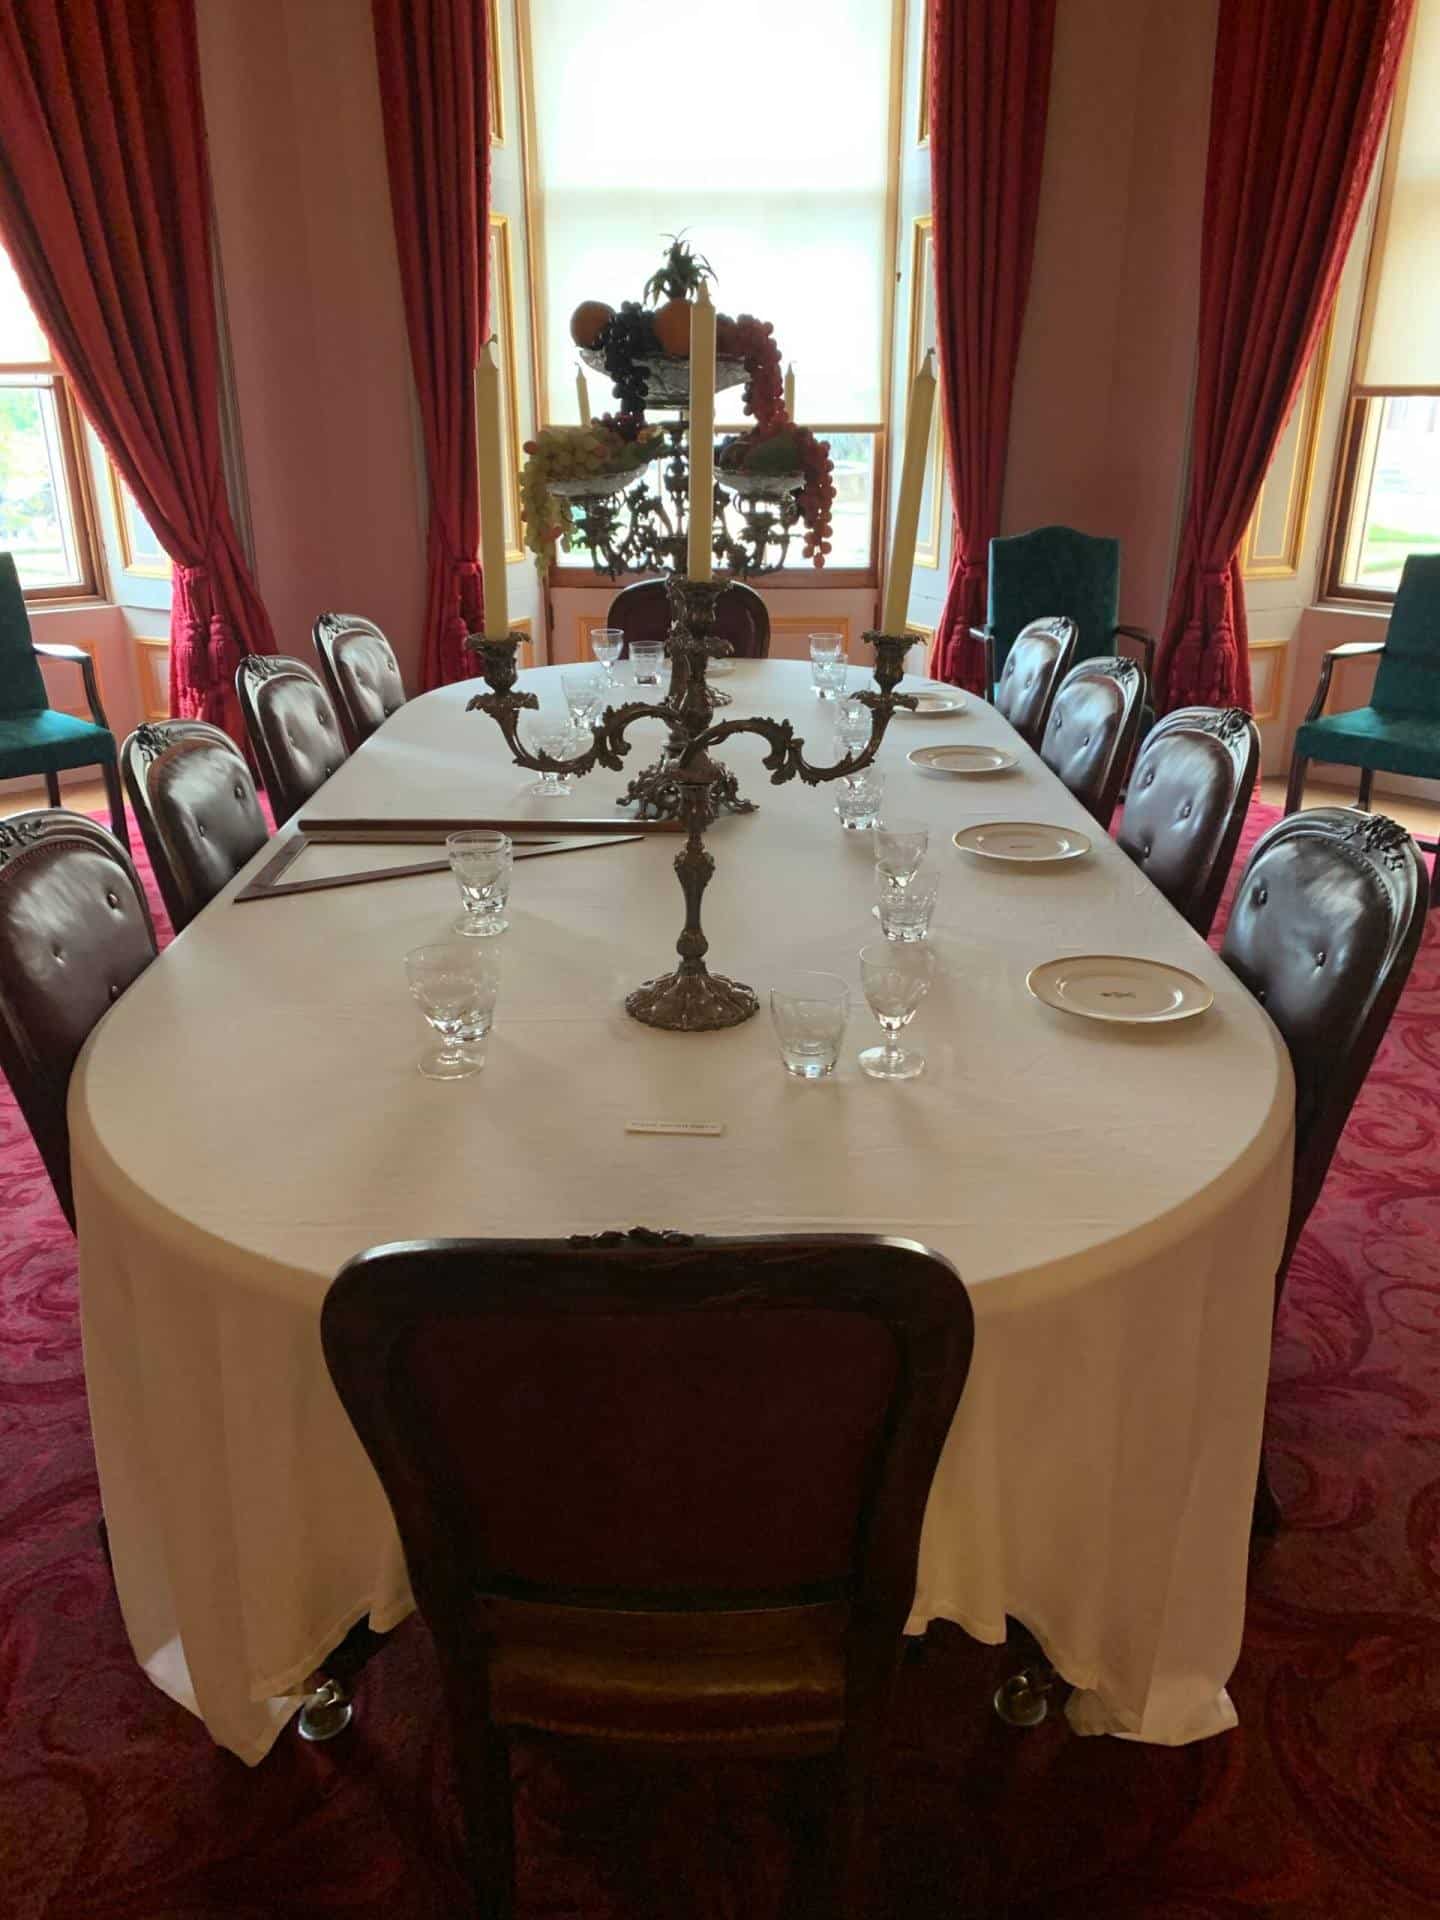 The dining table in the state rooms